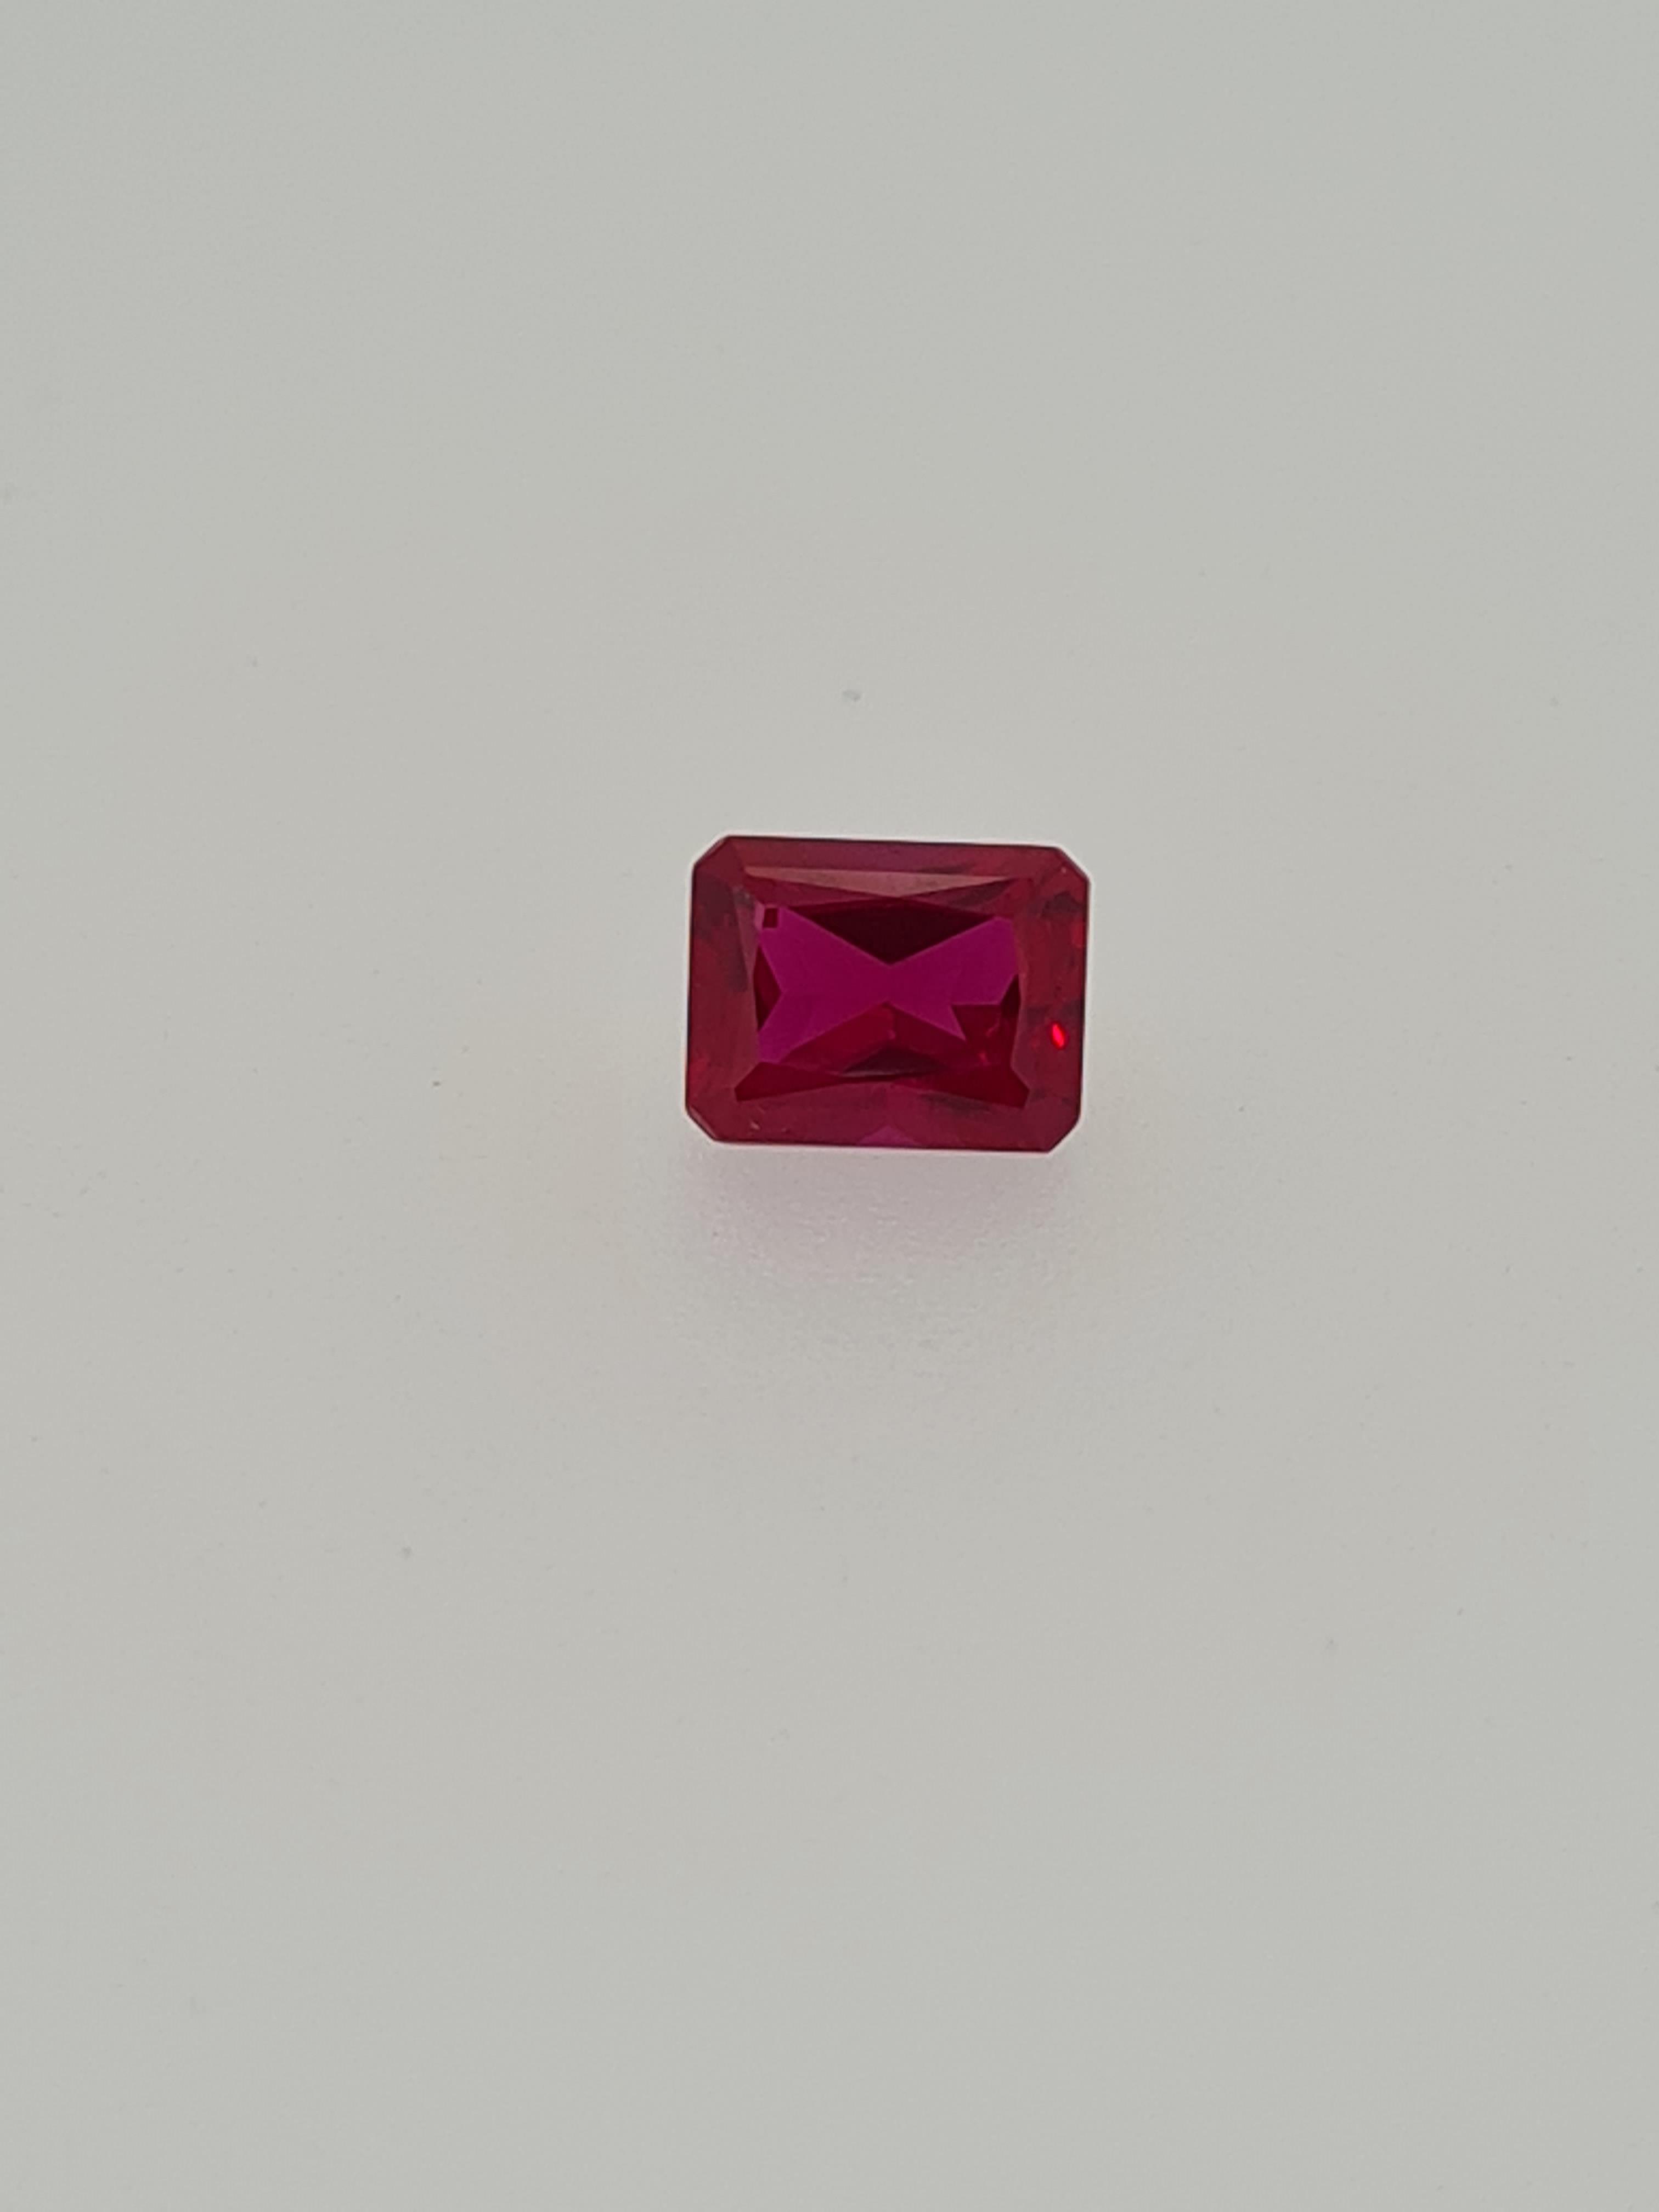 Synthetic ruby emerald cut stone - Image 3 of 4